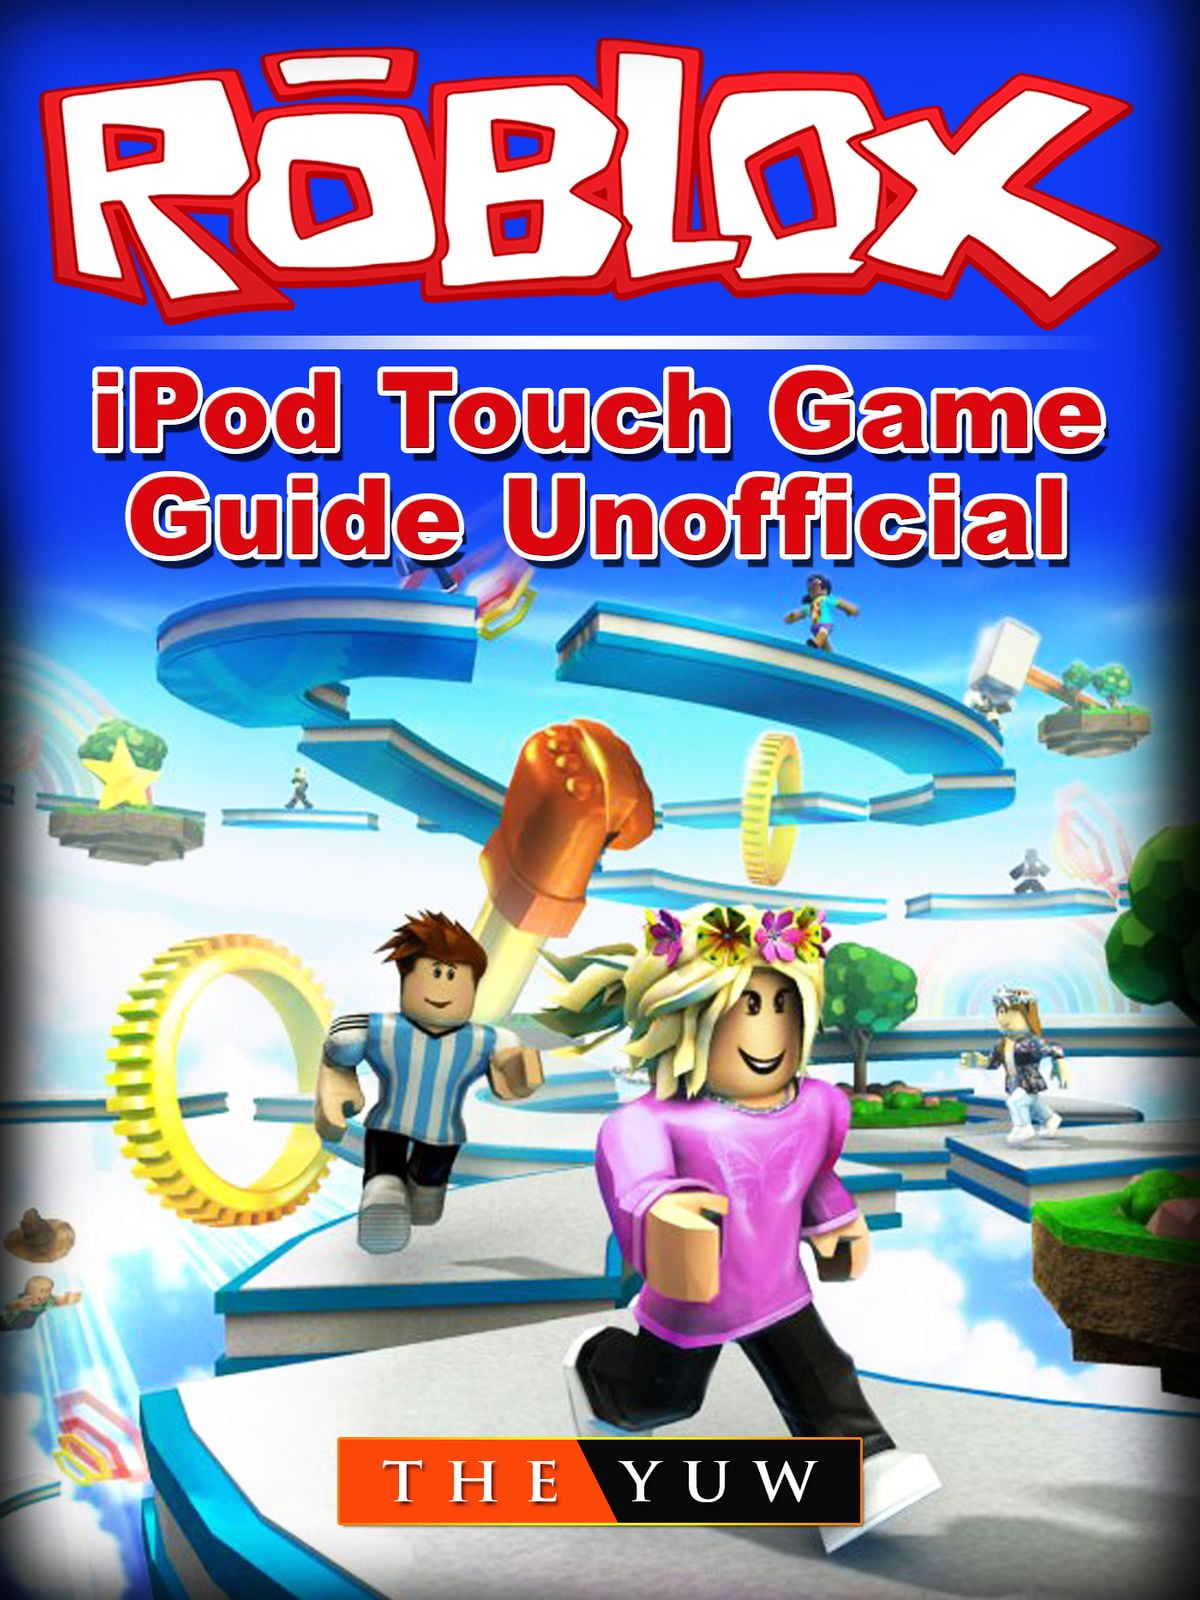 Roblox Ipod Touch Game Guide Unofficial Ebook Walmart Com Walmart Com - roblox ps4 unofficial game guidenook book